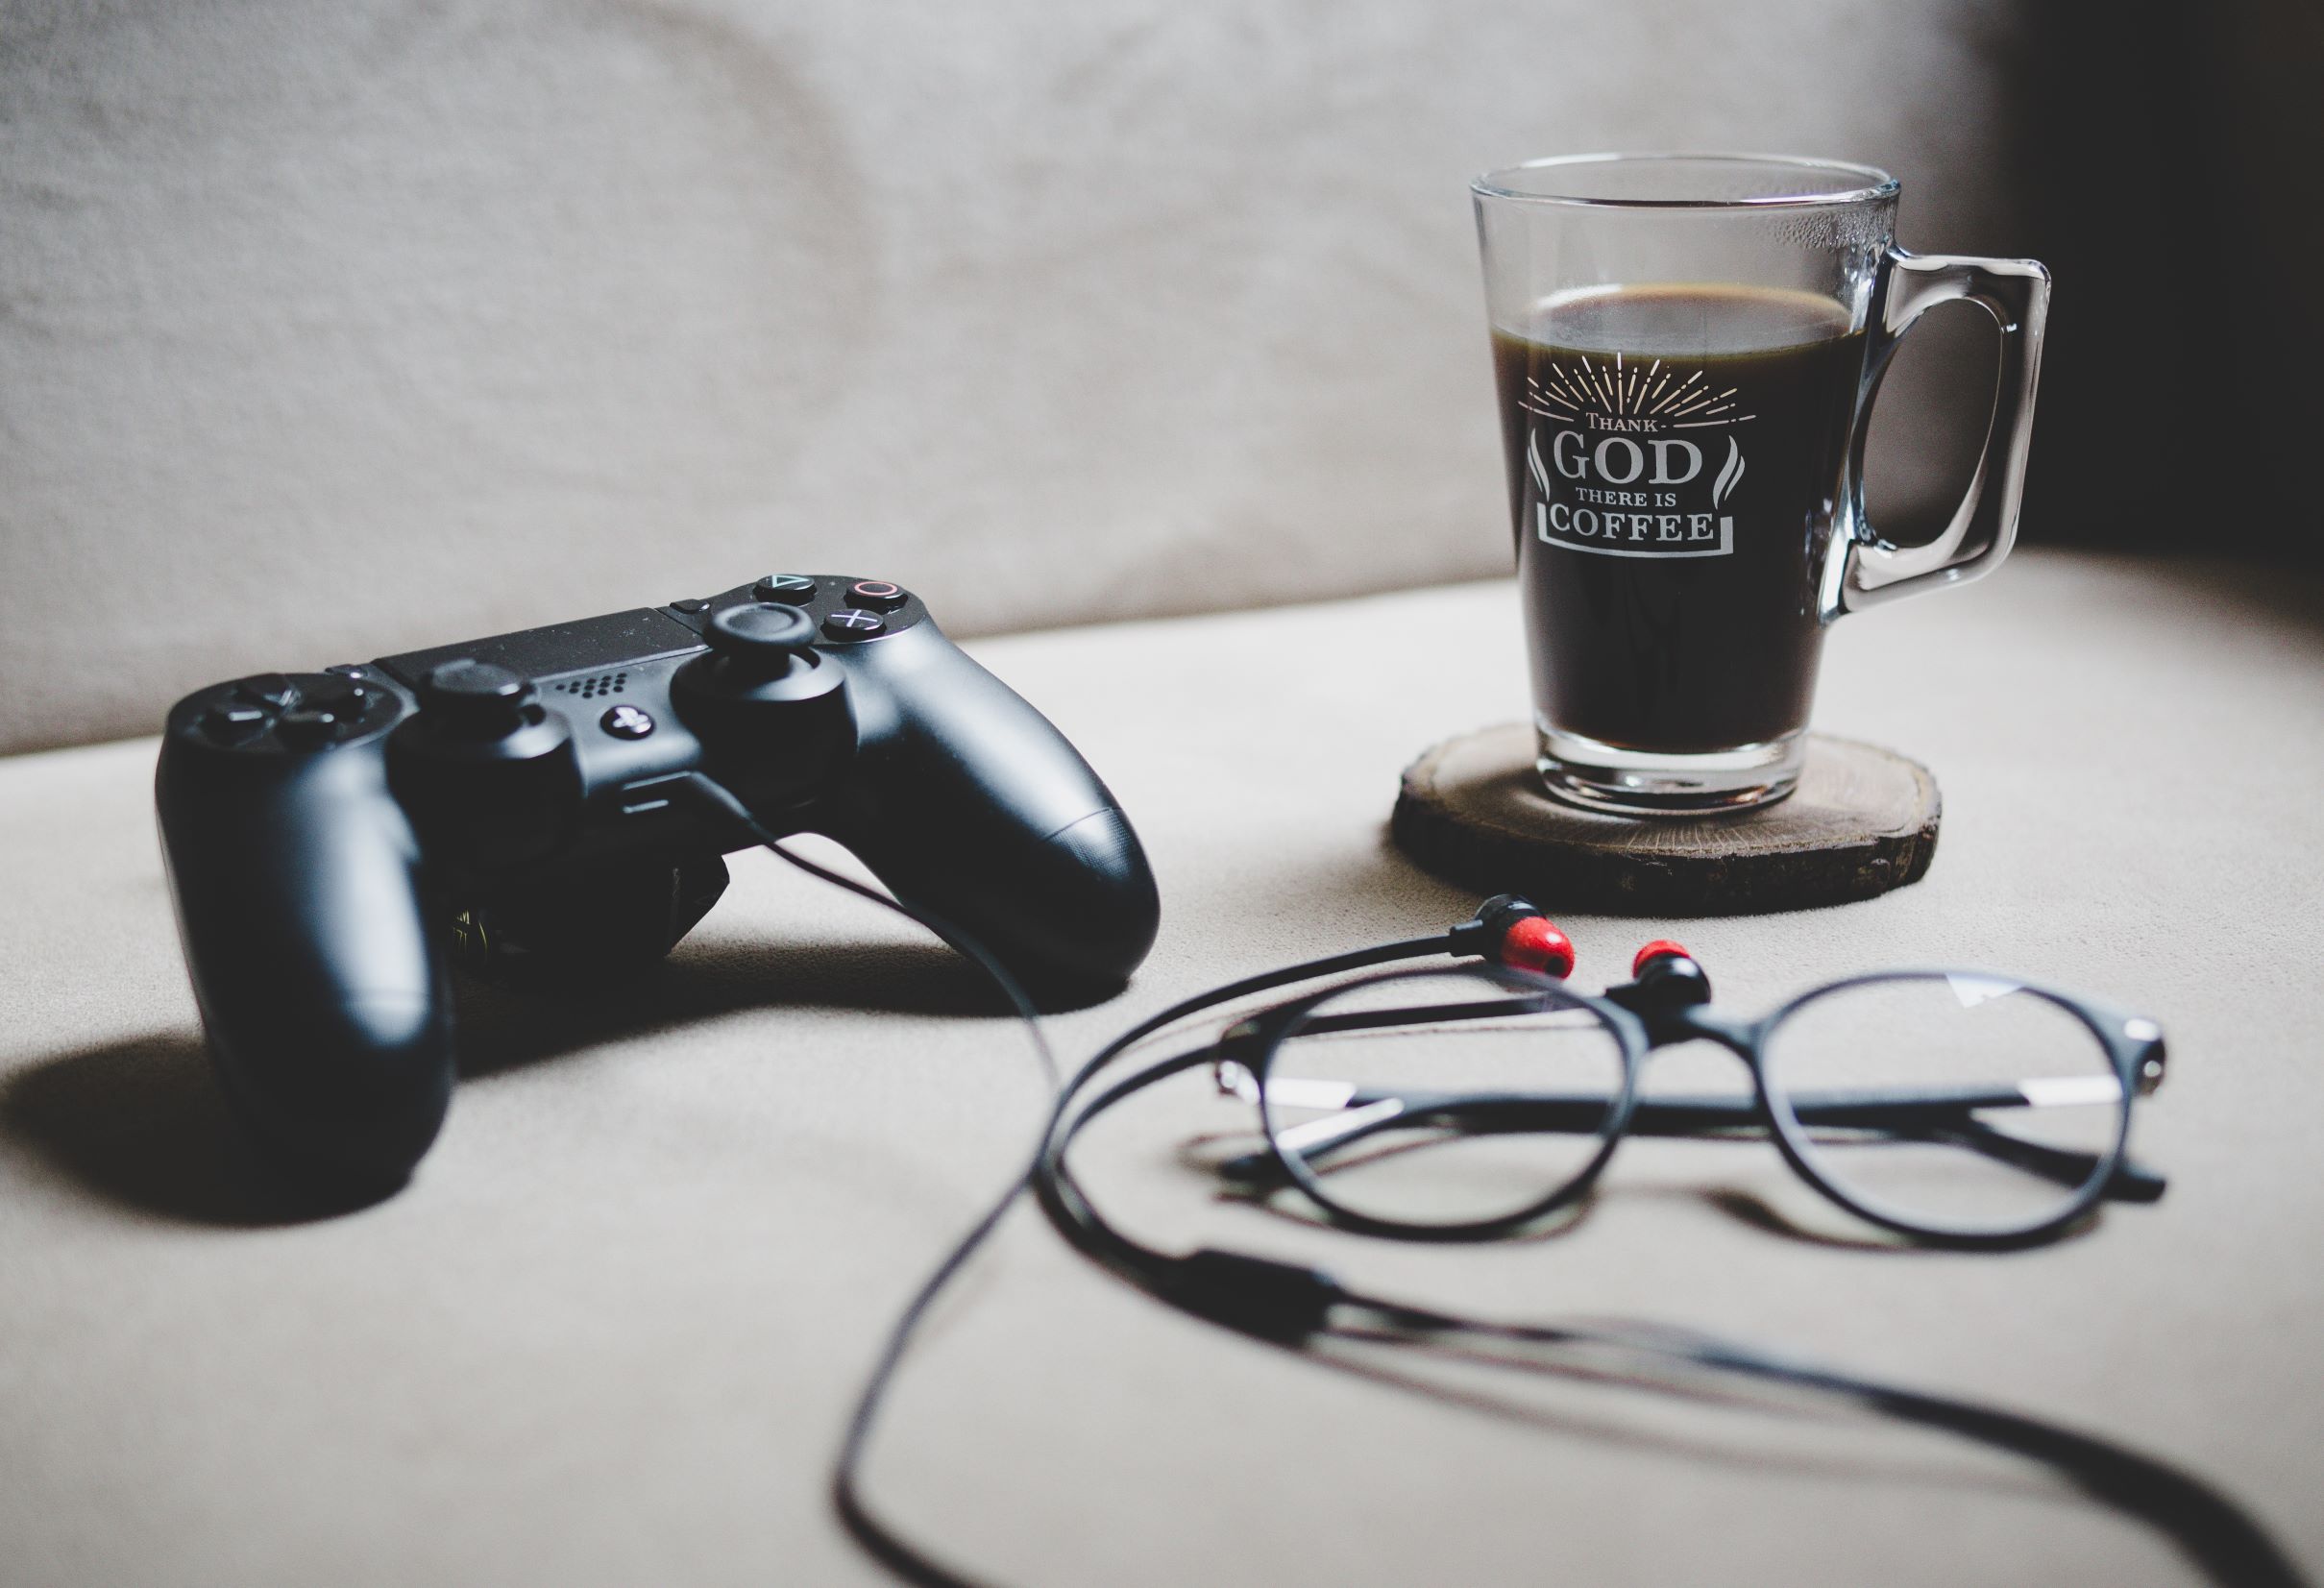 Gaming disorder is now officially recognized by the World Health Organization